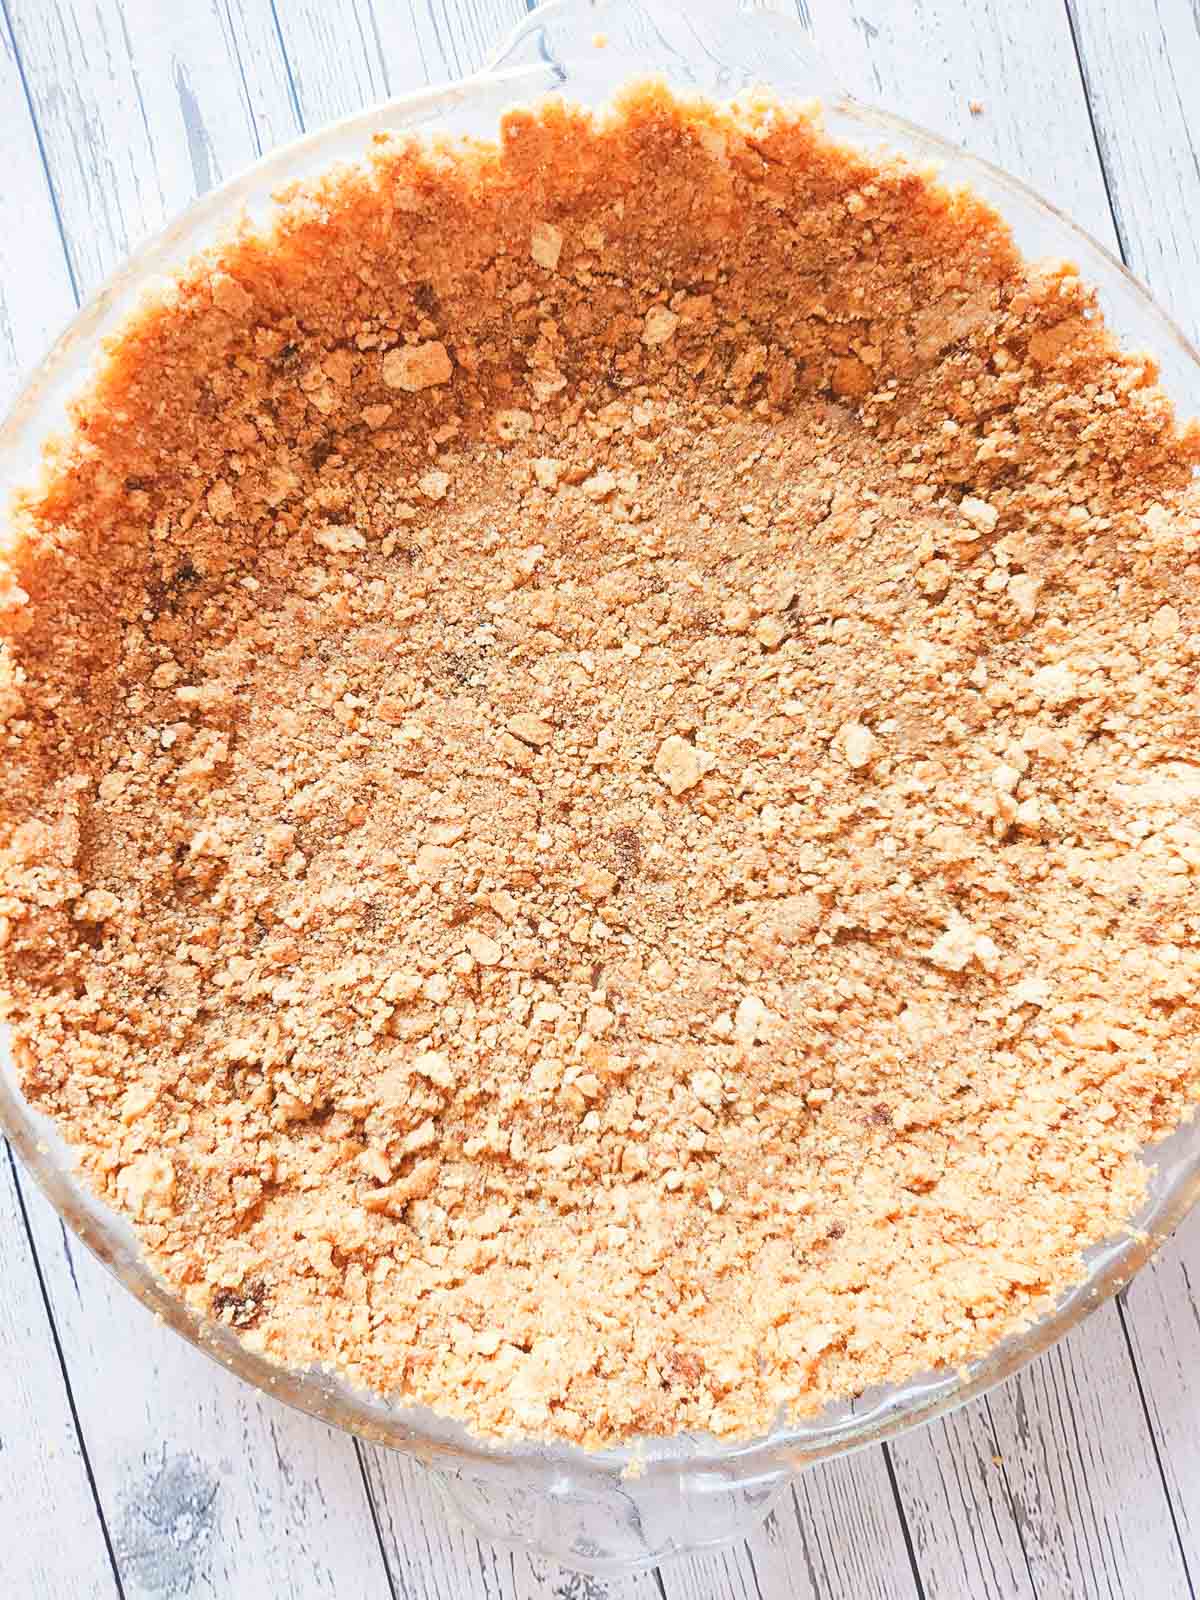 The graham cracker crust no-bake cheesecake ingredients pressed firmly into the pie shell.